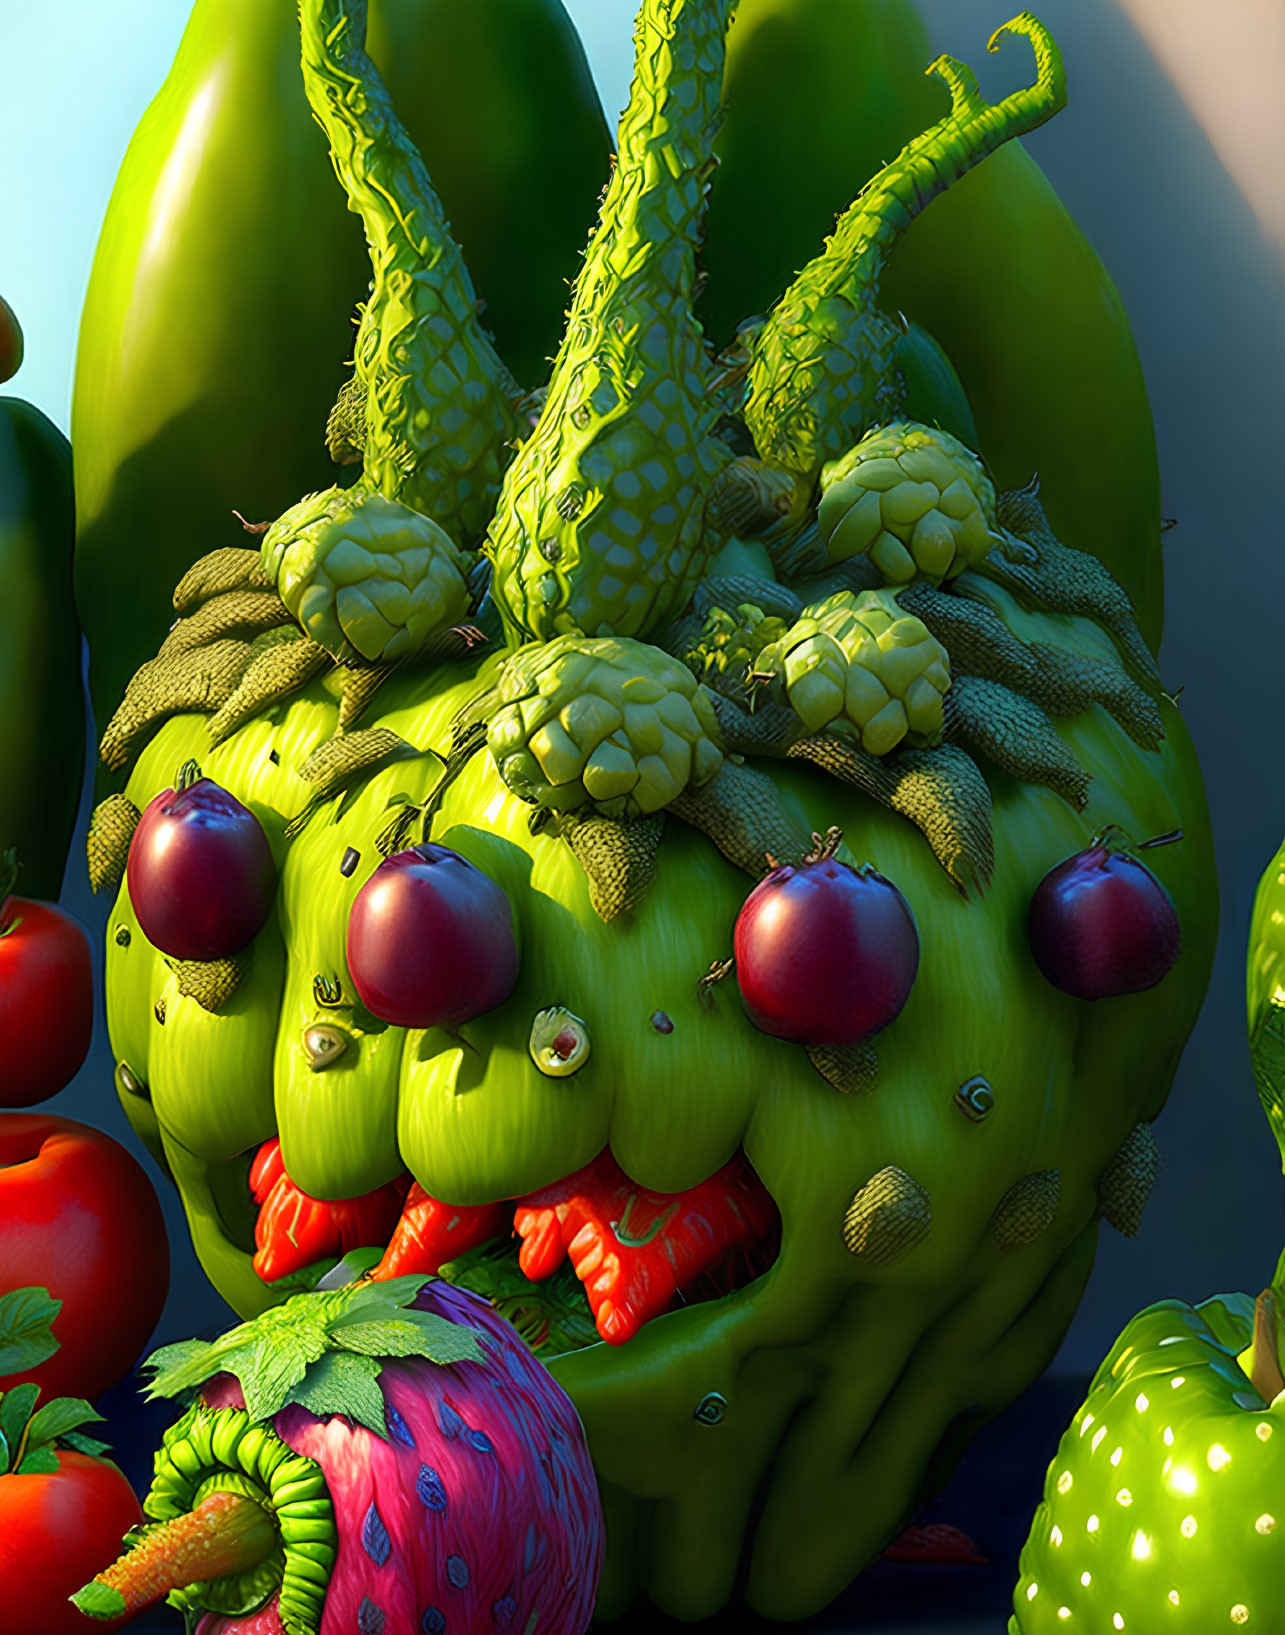 Vibrant surreal composition of assorted fruits and vegetables with glossy texture